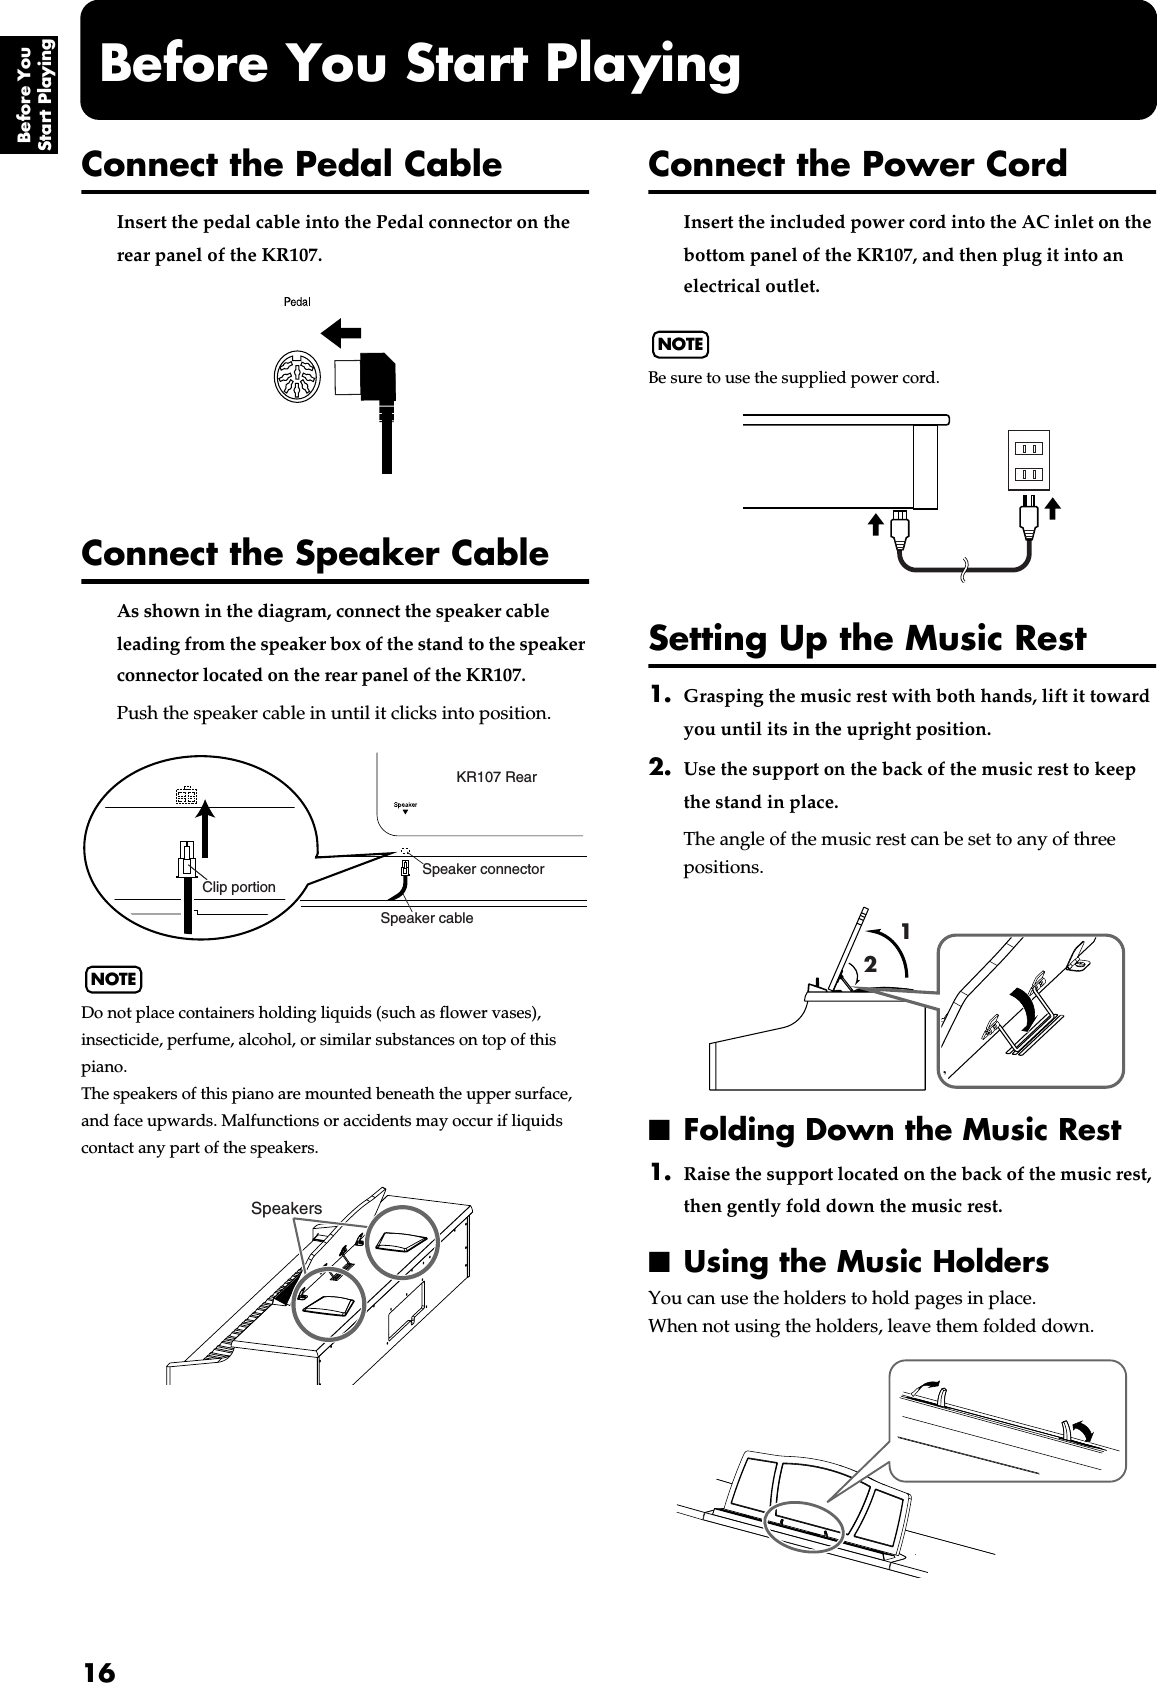 16Before You Start PlayingBefore You Start PlayingConnect the Pedal CableInsert the pedal cable into the Pedal connector on the rear panel of the KR107.fig.00-01Connect the Speaker CableAs shown in the diagram, connect the speaker cable leading from the speaker box of the stand to the speaker connector located on the rear panel of the KR107.Push the speaker cable in until it clicks into position.NOTEDo not place containers holding liquids (such as flower vases), insecticide, perfume, alcohol, or similar substances on top of this piano. The speakers of this piano are mounted beneath the upper surface, and face upwards. Malfunctions or accidents may occur if liquids contact any part of the speakers.Connect the Power CordInsert the included power cord into the AC inlet on the bottom panel of the KR107, and then plug it into an electrical outlet.NOTEBe sure to use the supplied power cord.fig.00-02Setting Up the Music Rest1. Grasping the music rest with both hands, lift it toward you until its in the upright position. 2. Use the support on the back of the music rest to keep the stand in place.The angle of the music rest can be set to any of three positions.fig.mu_stand■Folding Down the Music Rest1. Raise the support located on the back of the music rest, then gently fold down the music rest.■Using the Music HoldersYou can use the holders to hold pages in place.When not using the holders, leave them folded down.fig.mu_stand4KR107 RearSpeaker cableSpeaker connectorClip portionSpeakers12